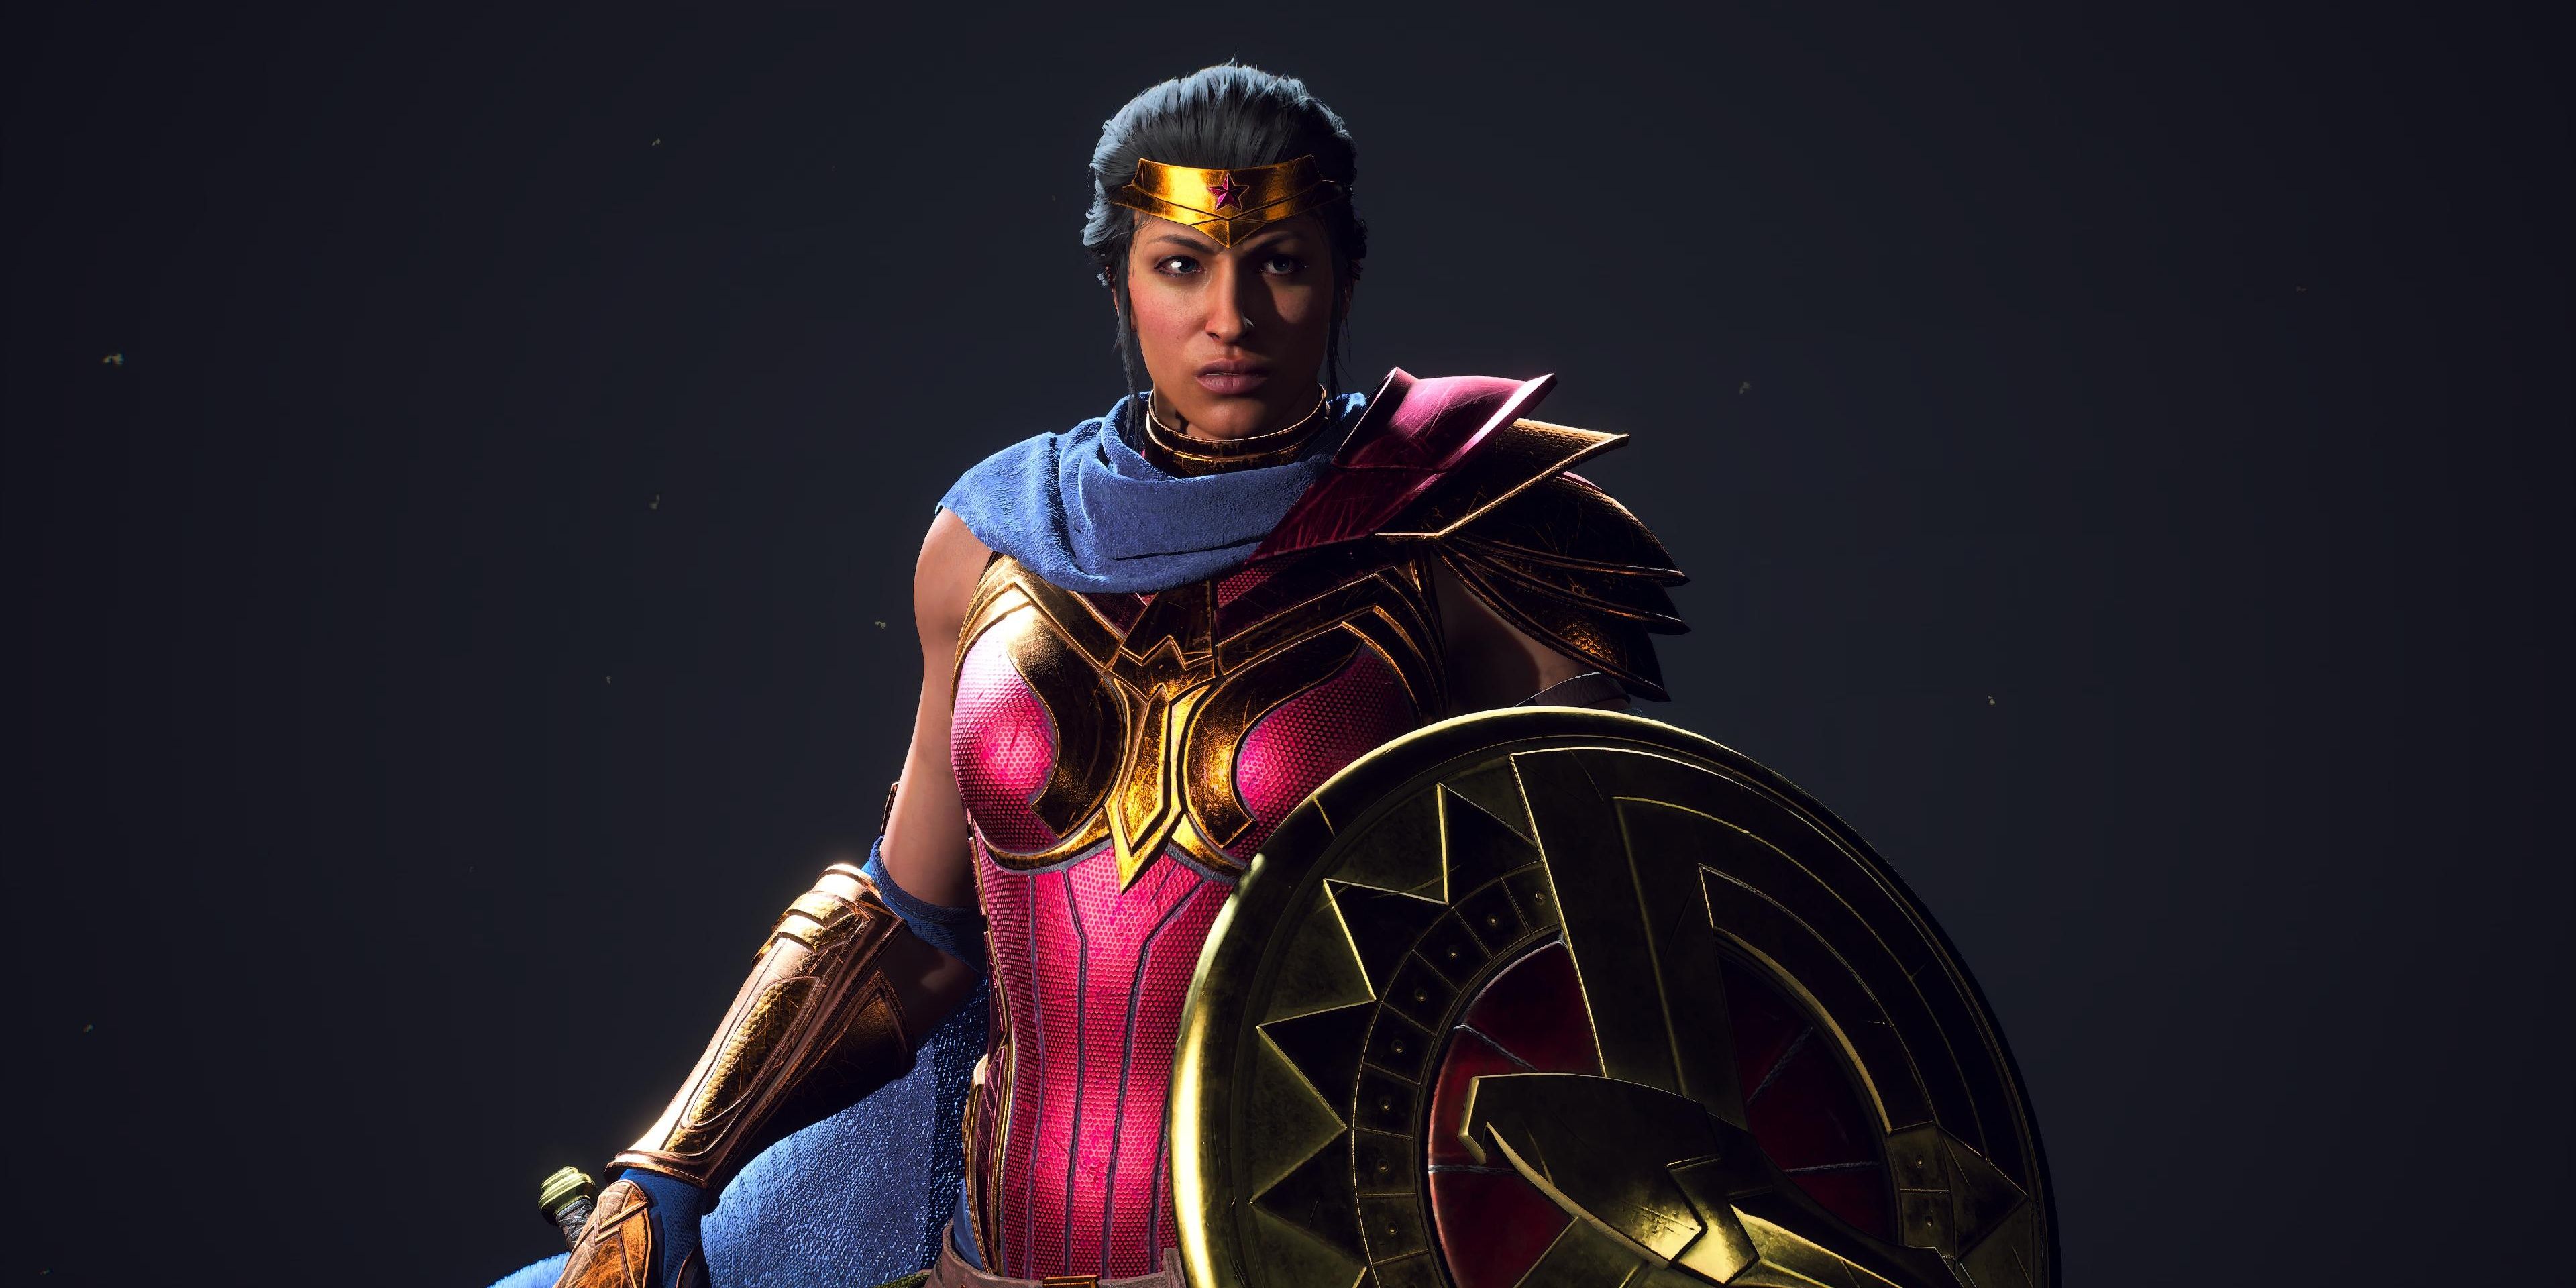 wonder woman with sword and shield